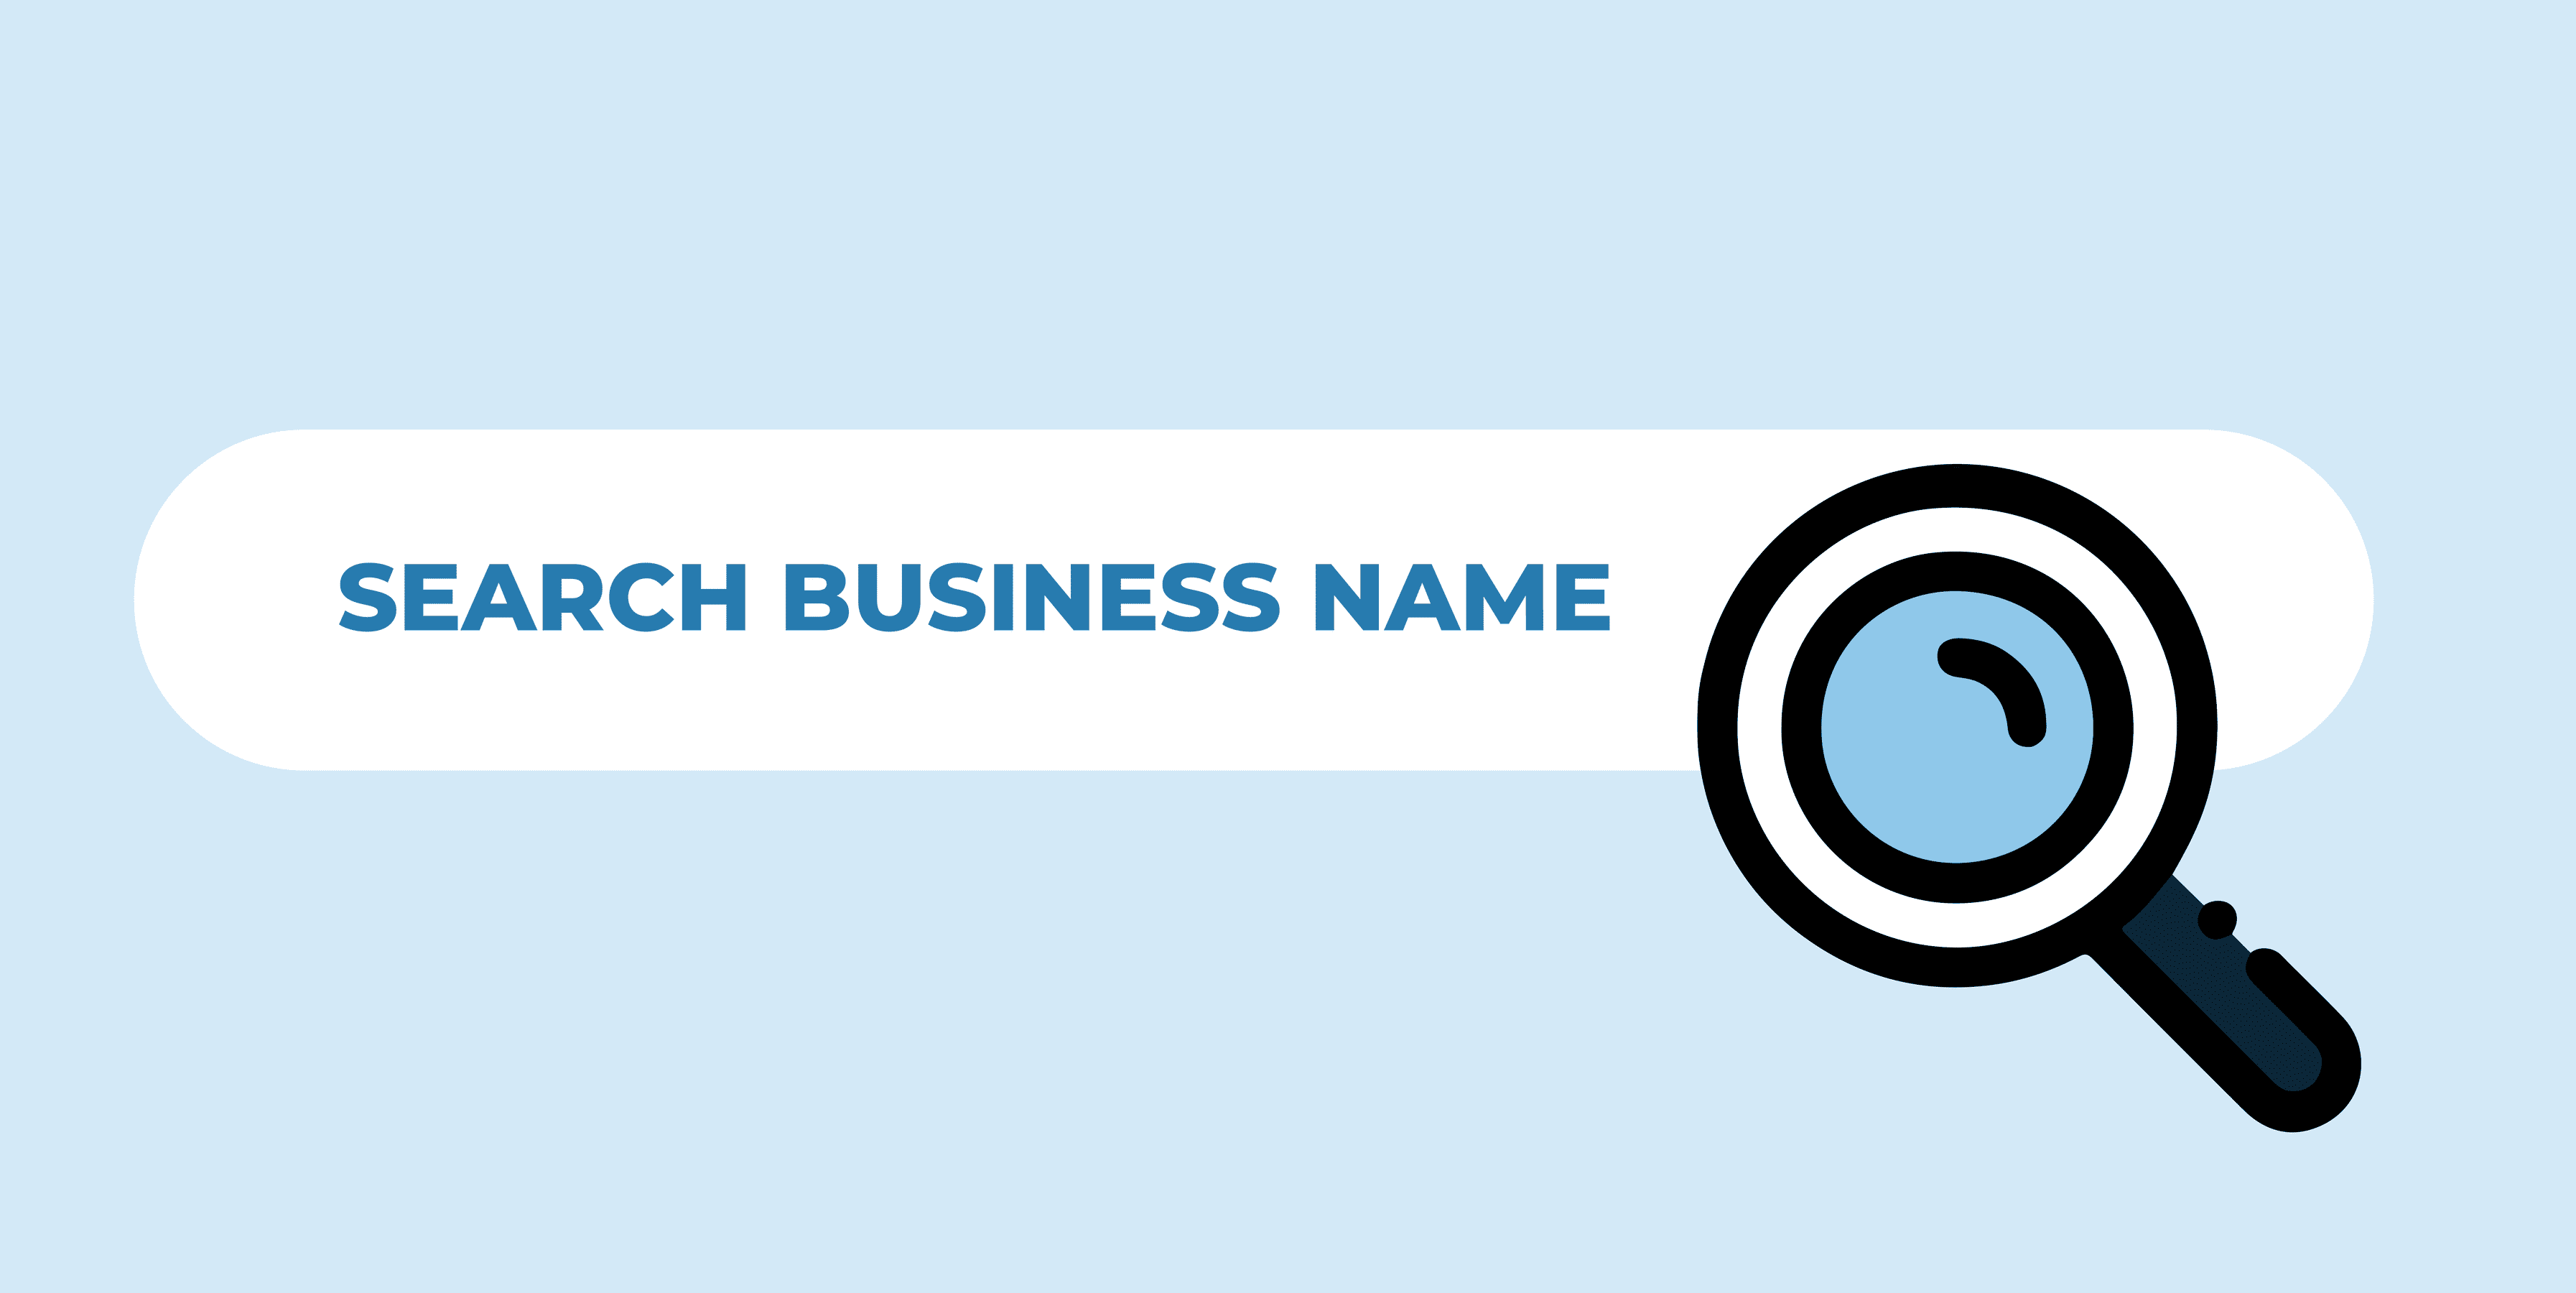 search business name